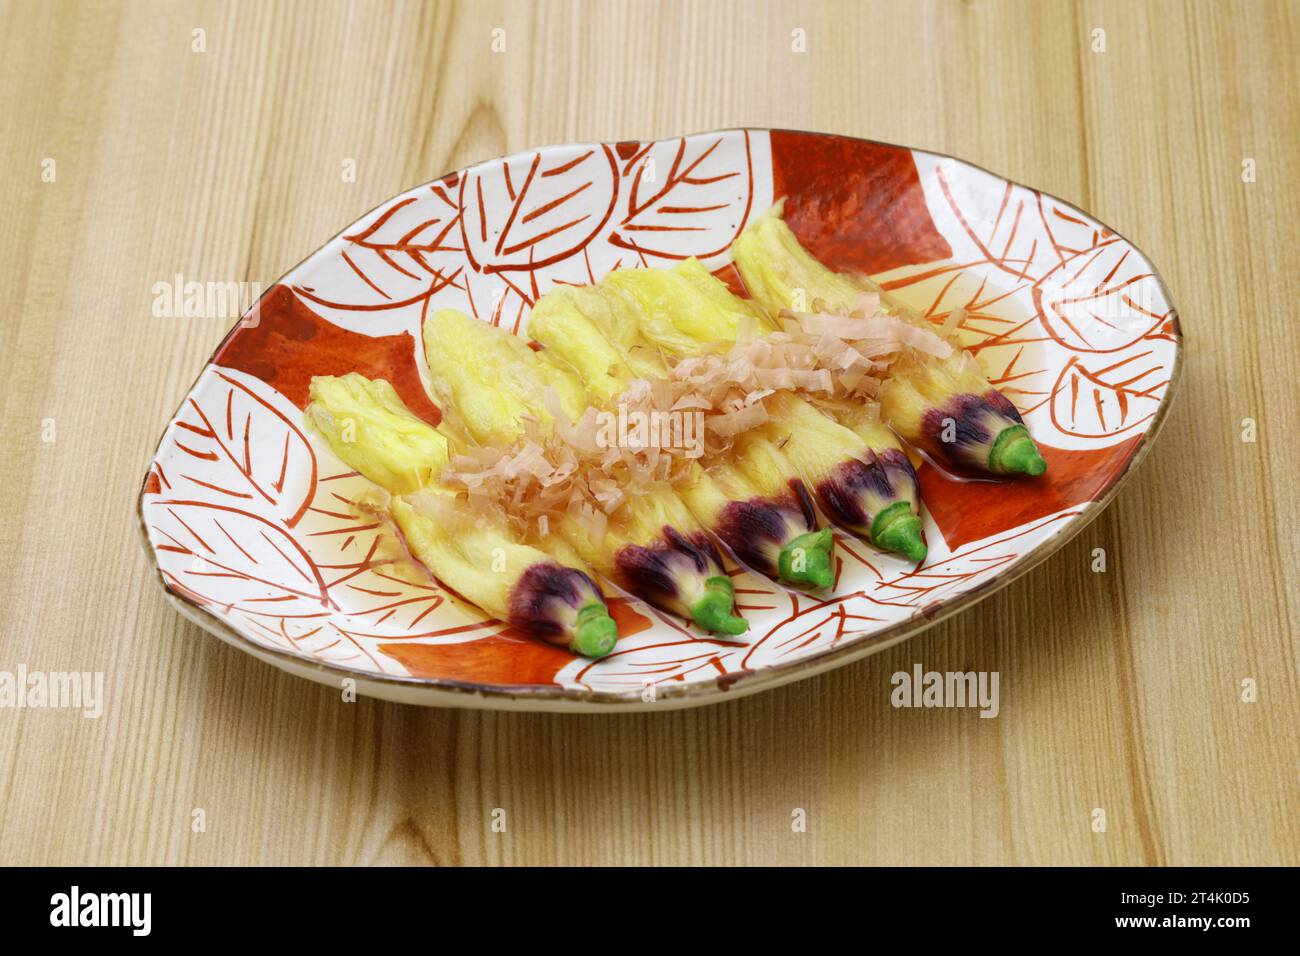 edible okra flowers soaking in dashi stock and sprinkled with bonito flakes, Japanese cuisine Stock Photo